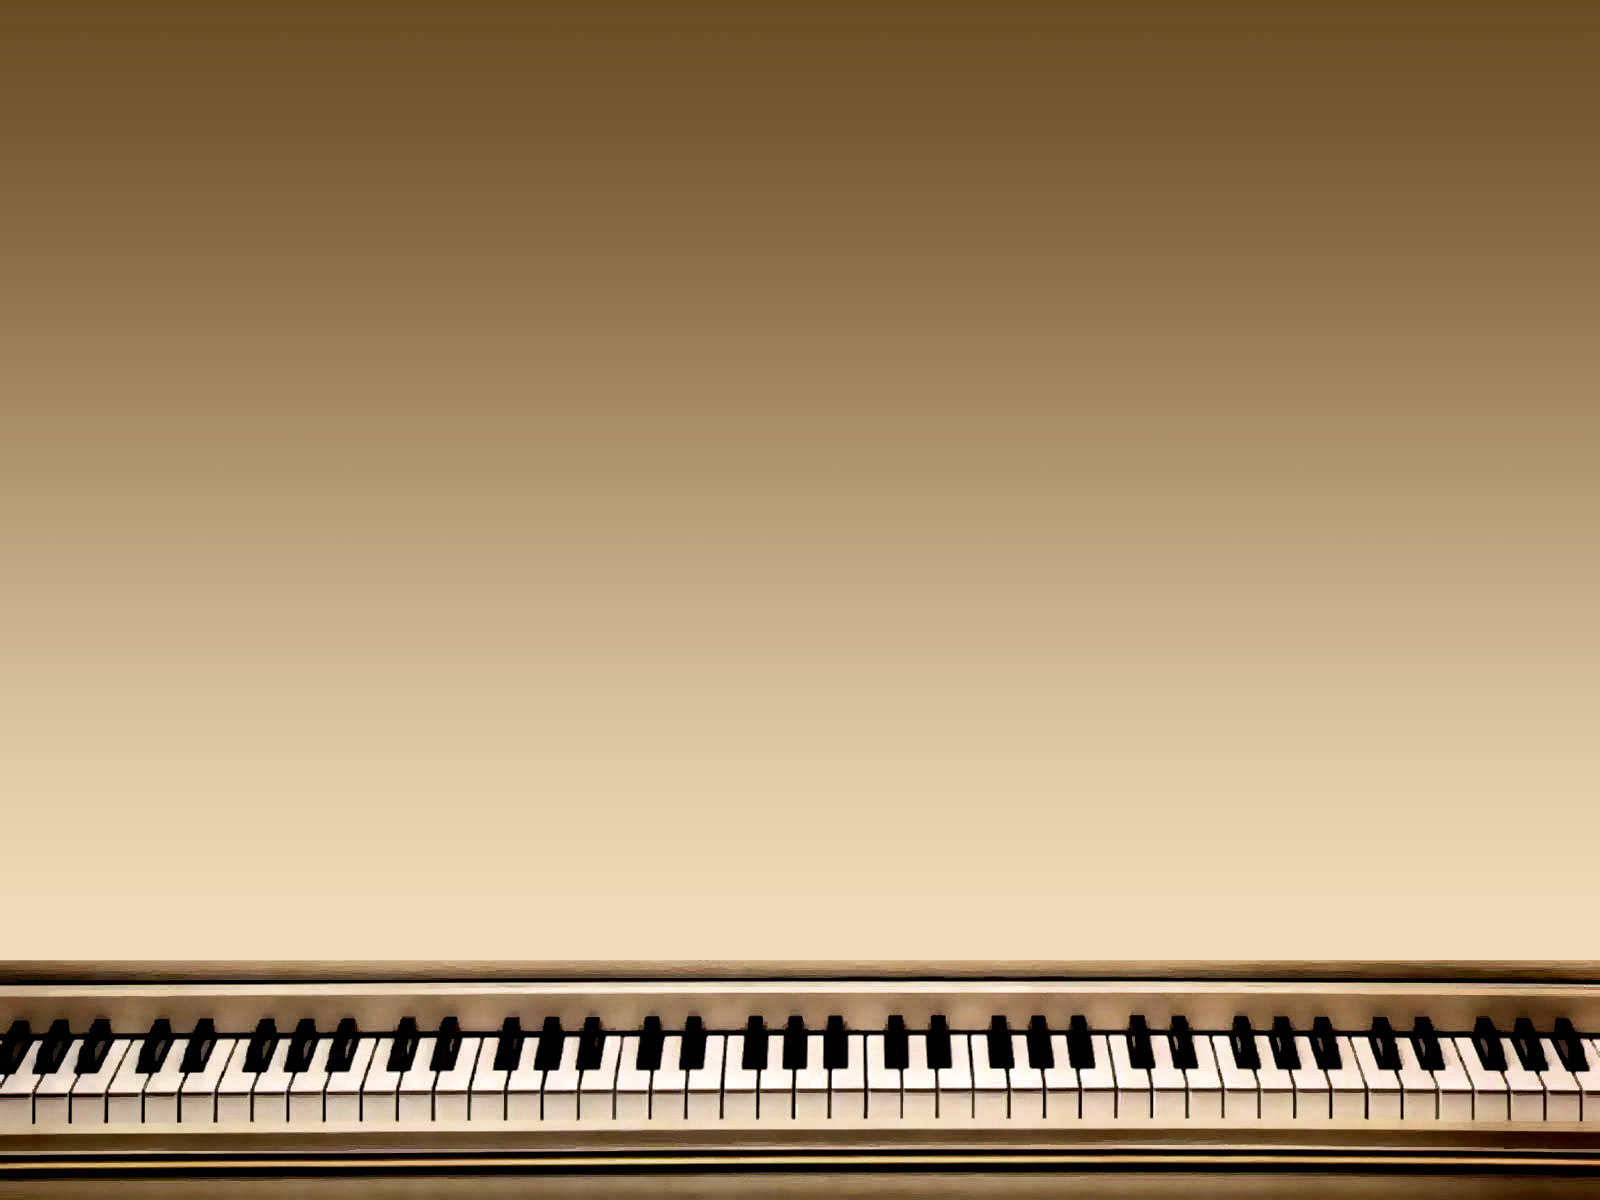 Piano Background For PowerPoint Music PPT Templates